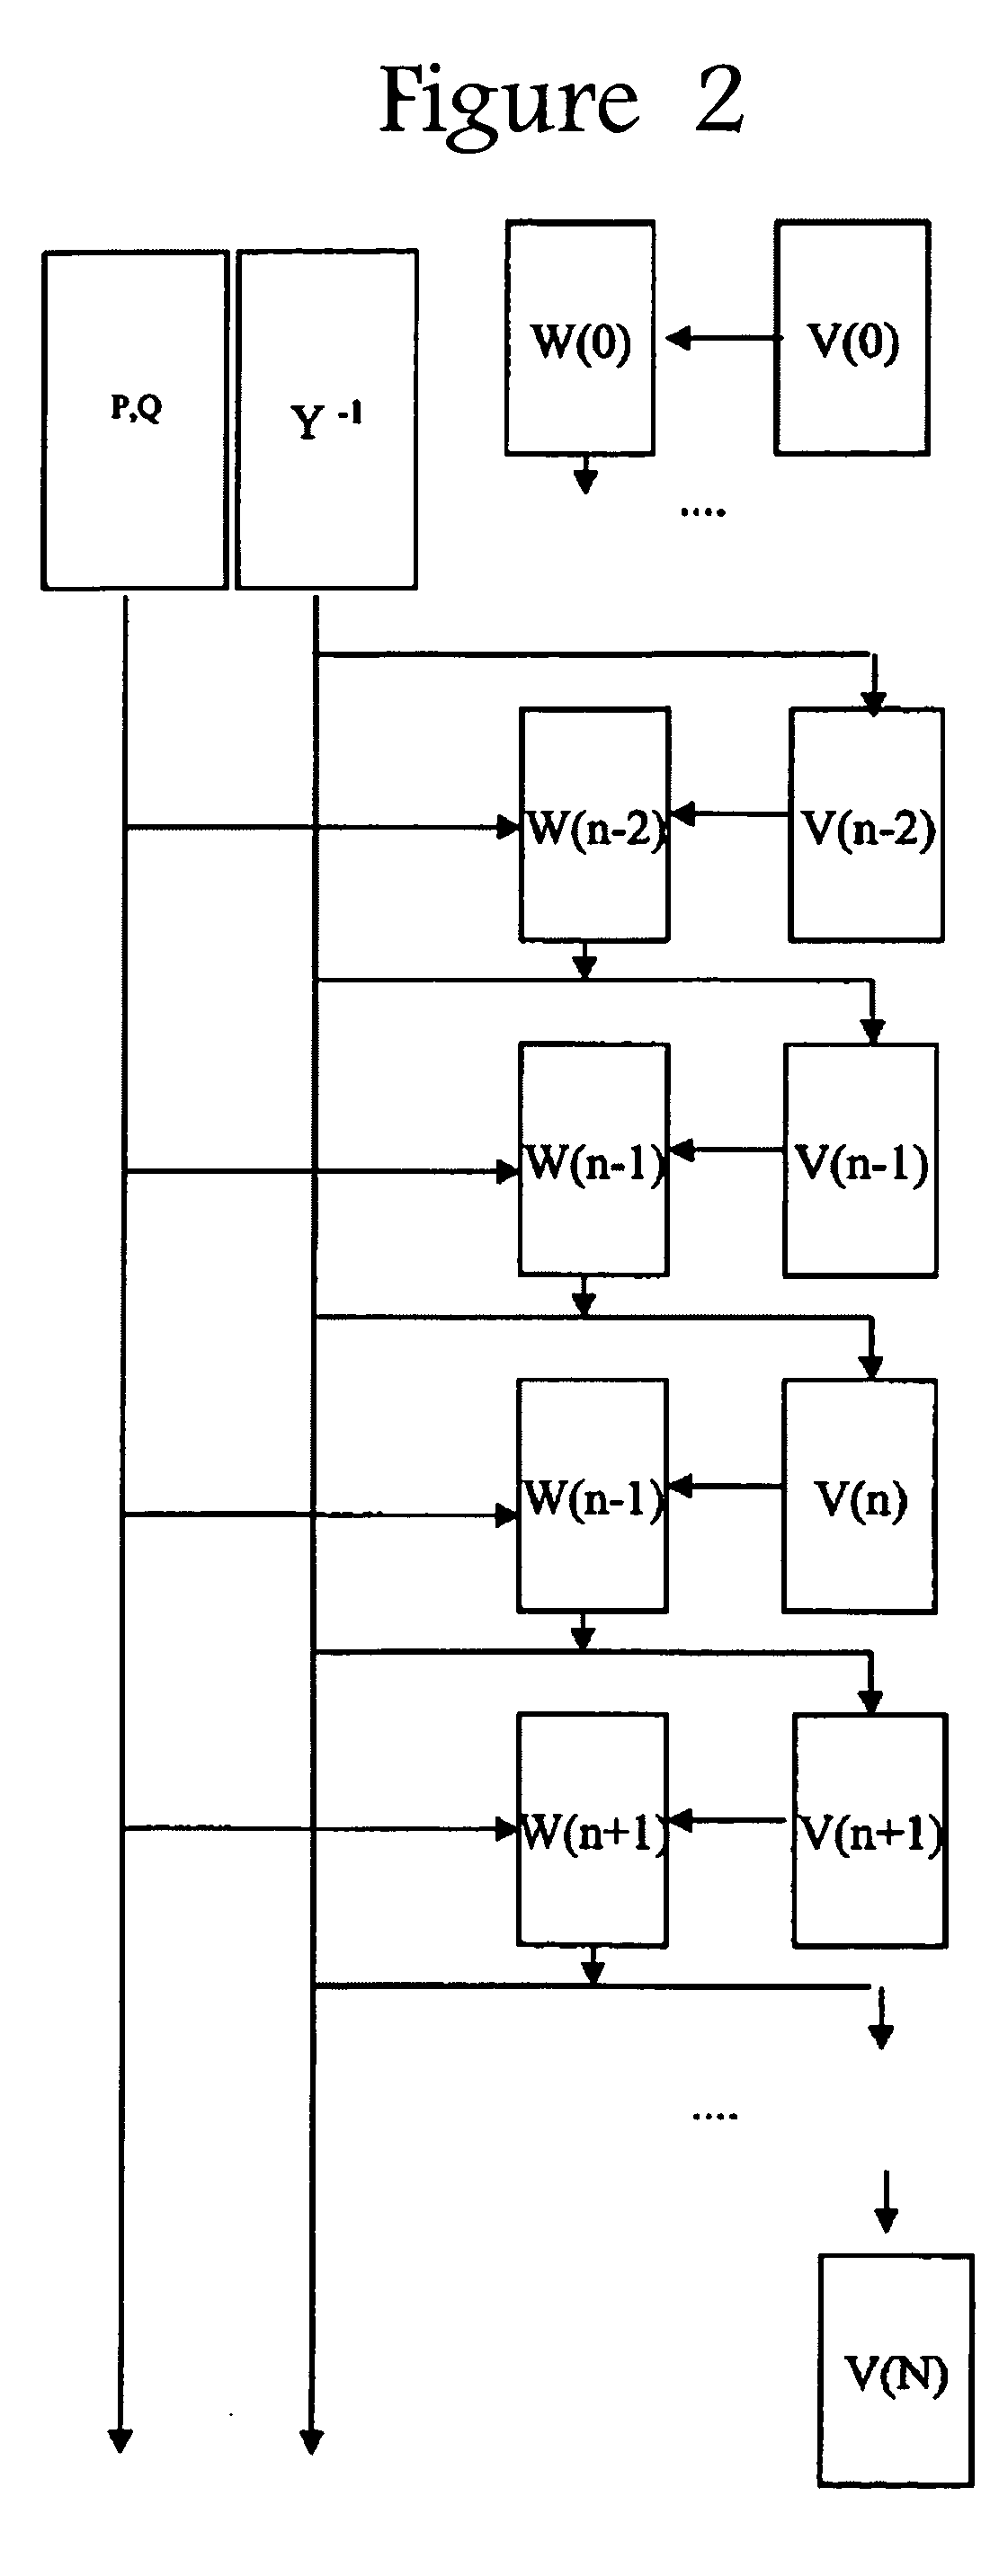 System and method for monitoring and managing electrical power transmission and distribution networks